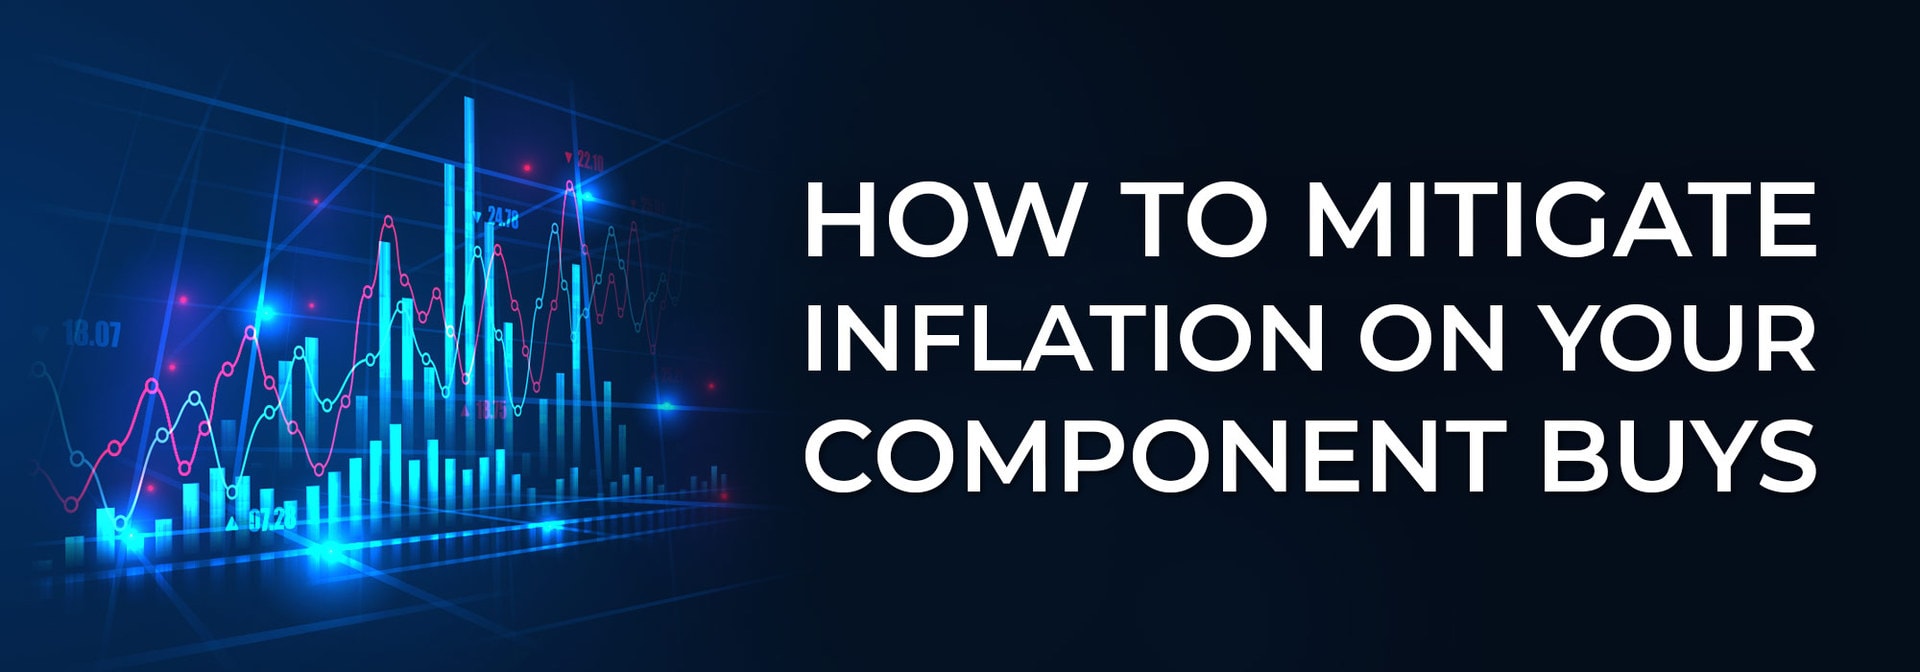 How to Mitigate Inflation on Your Component Buys